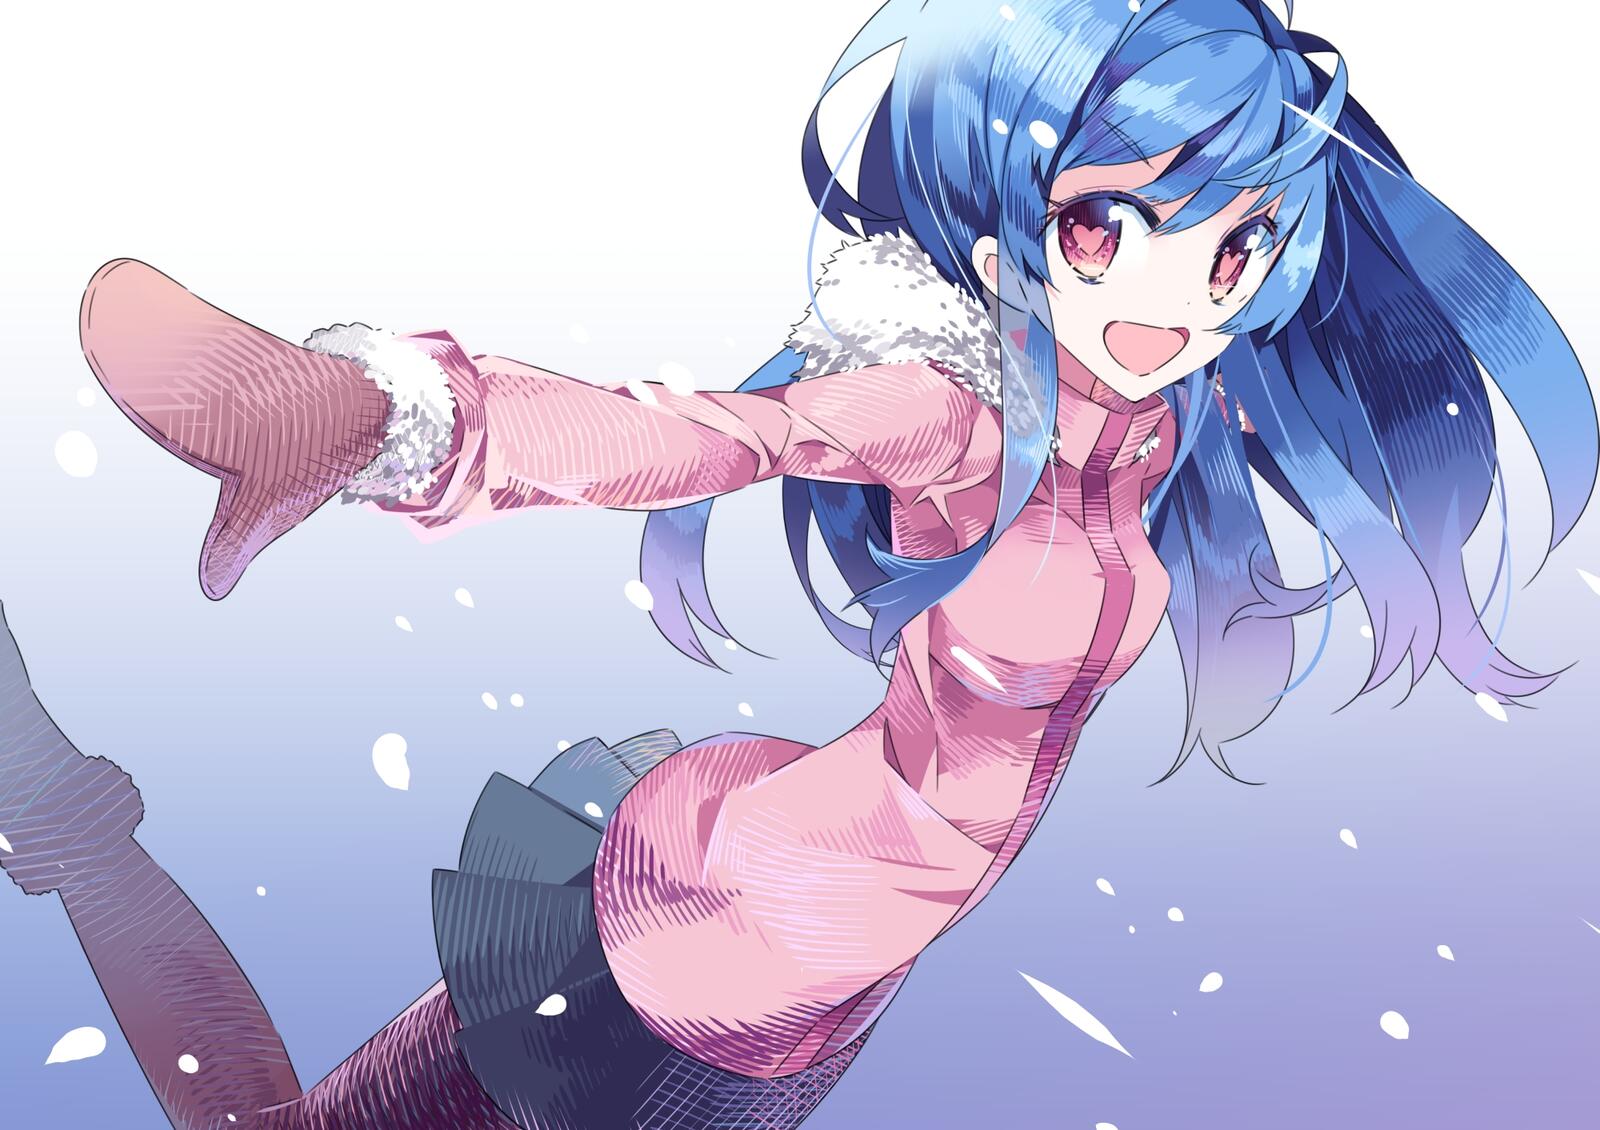 Wallpapers wallpaper anime girl winter outfits an anime on the desktop